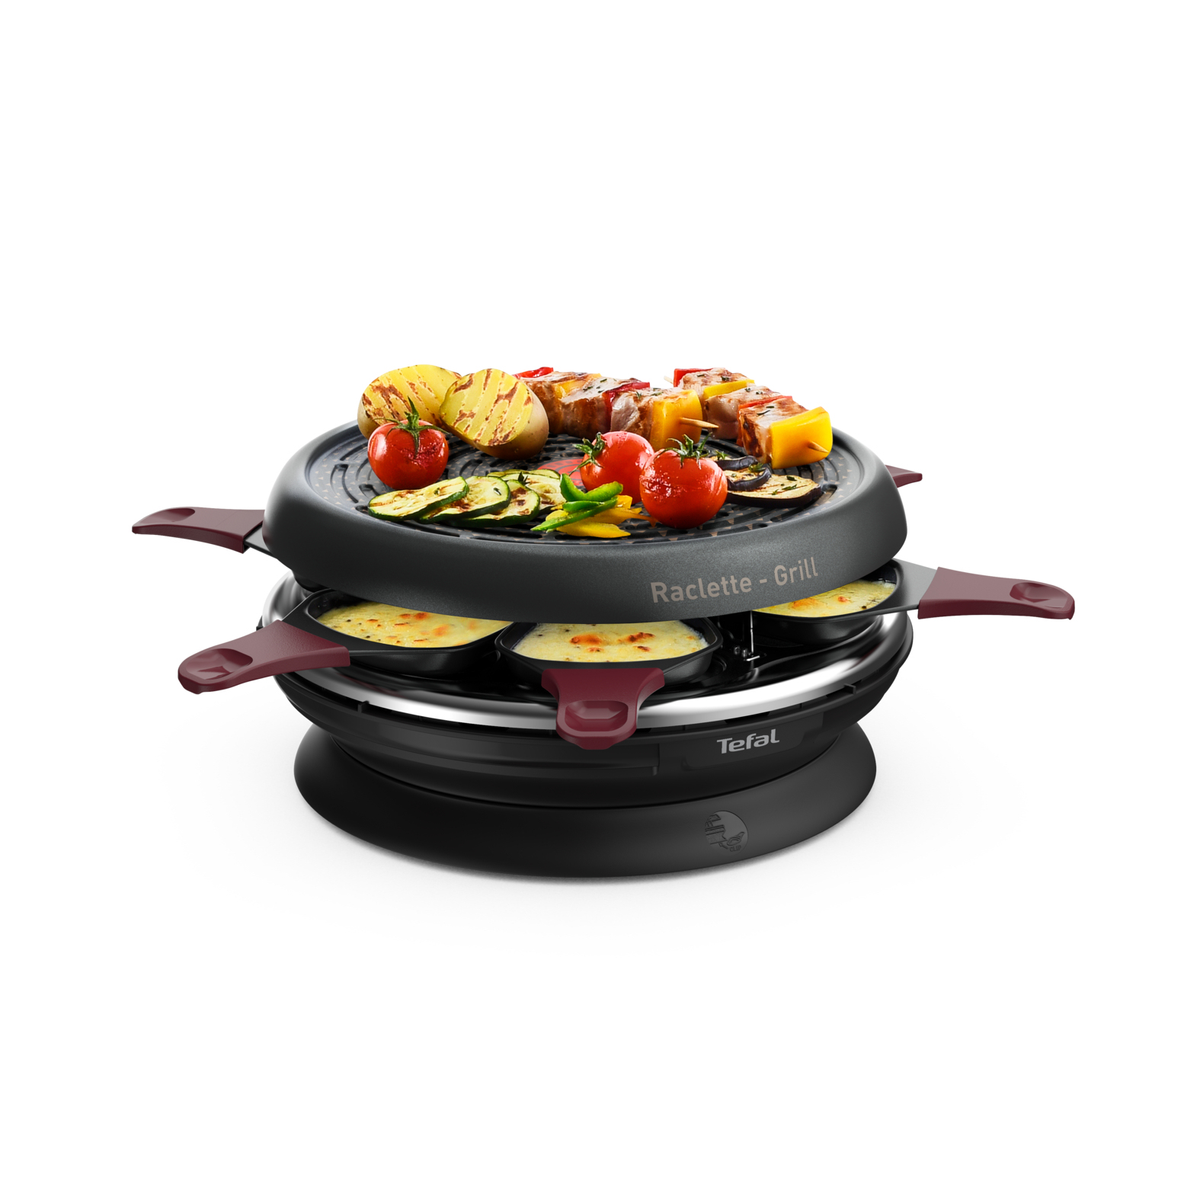 TEFAL RE 1820 RACLETTE-GRILL NEO Raclette INVENT